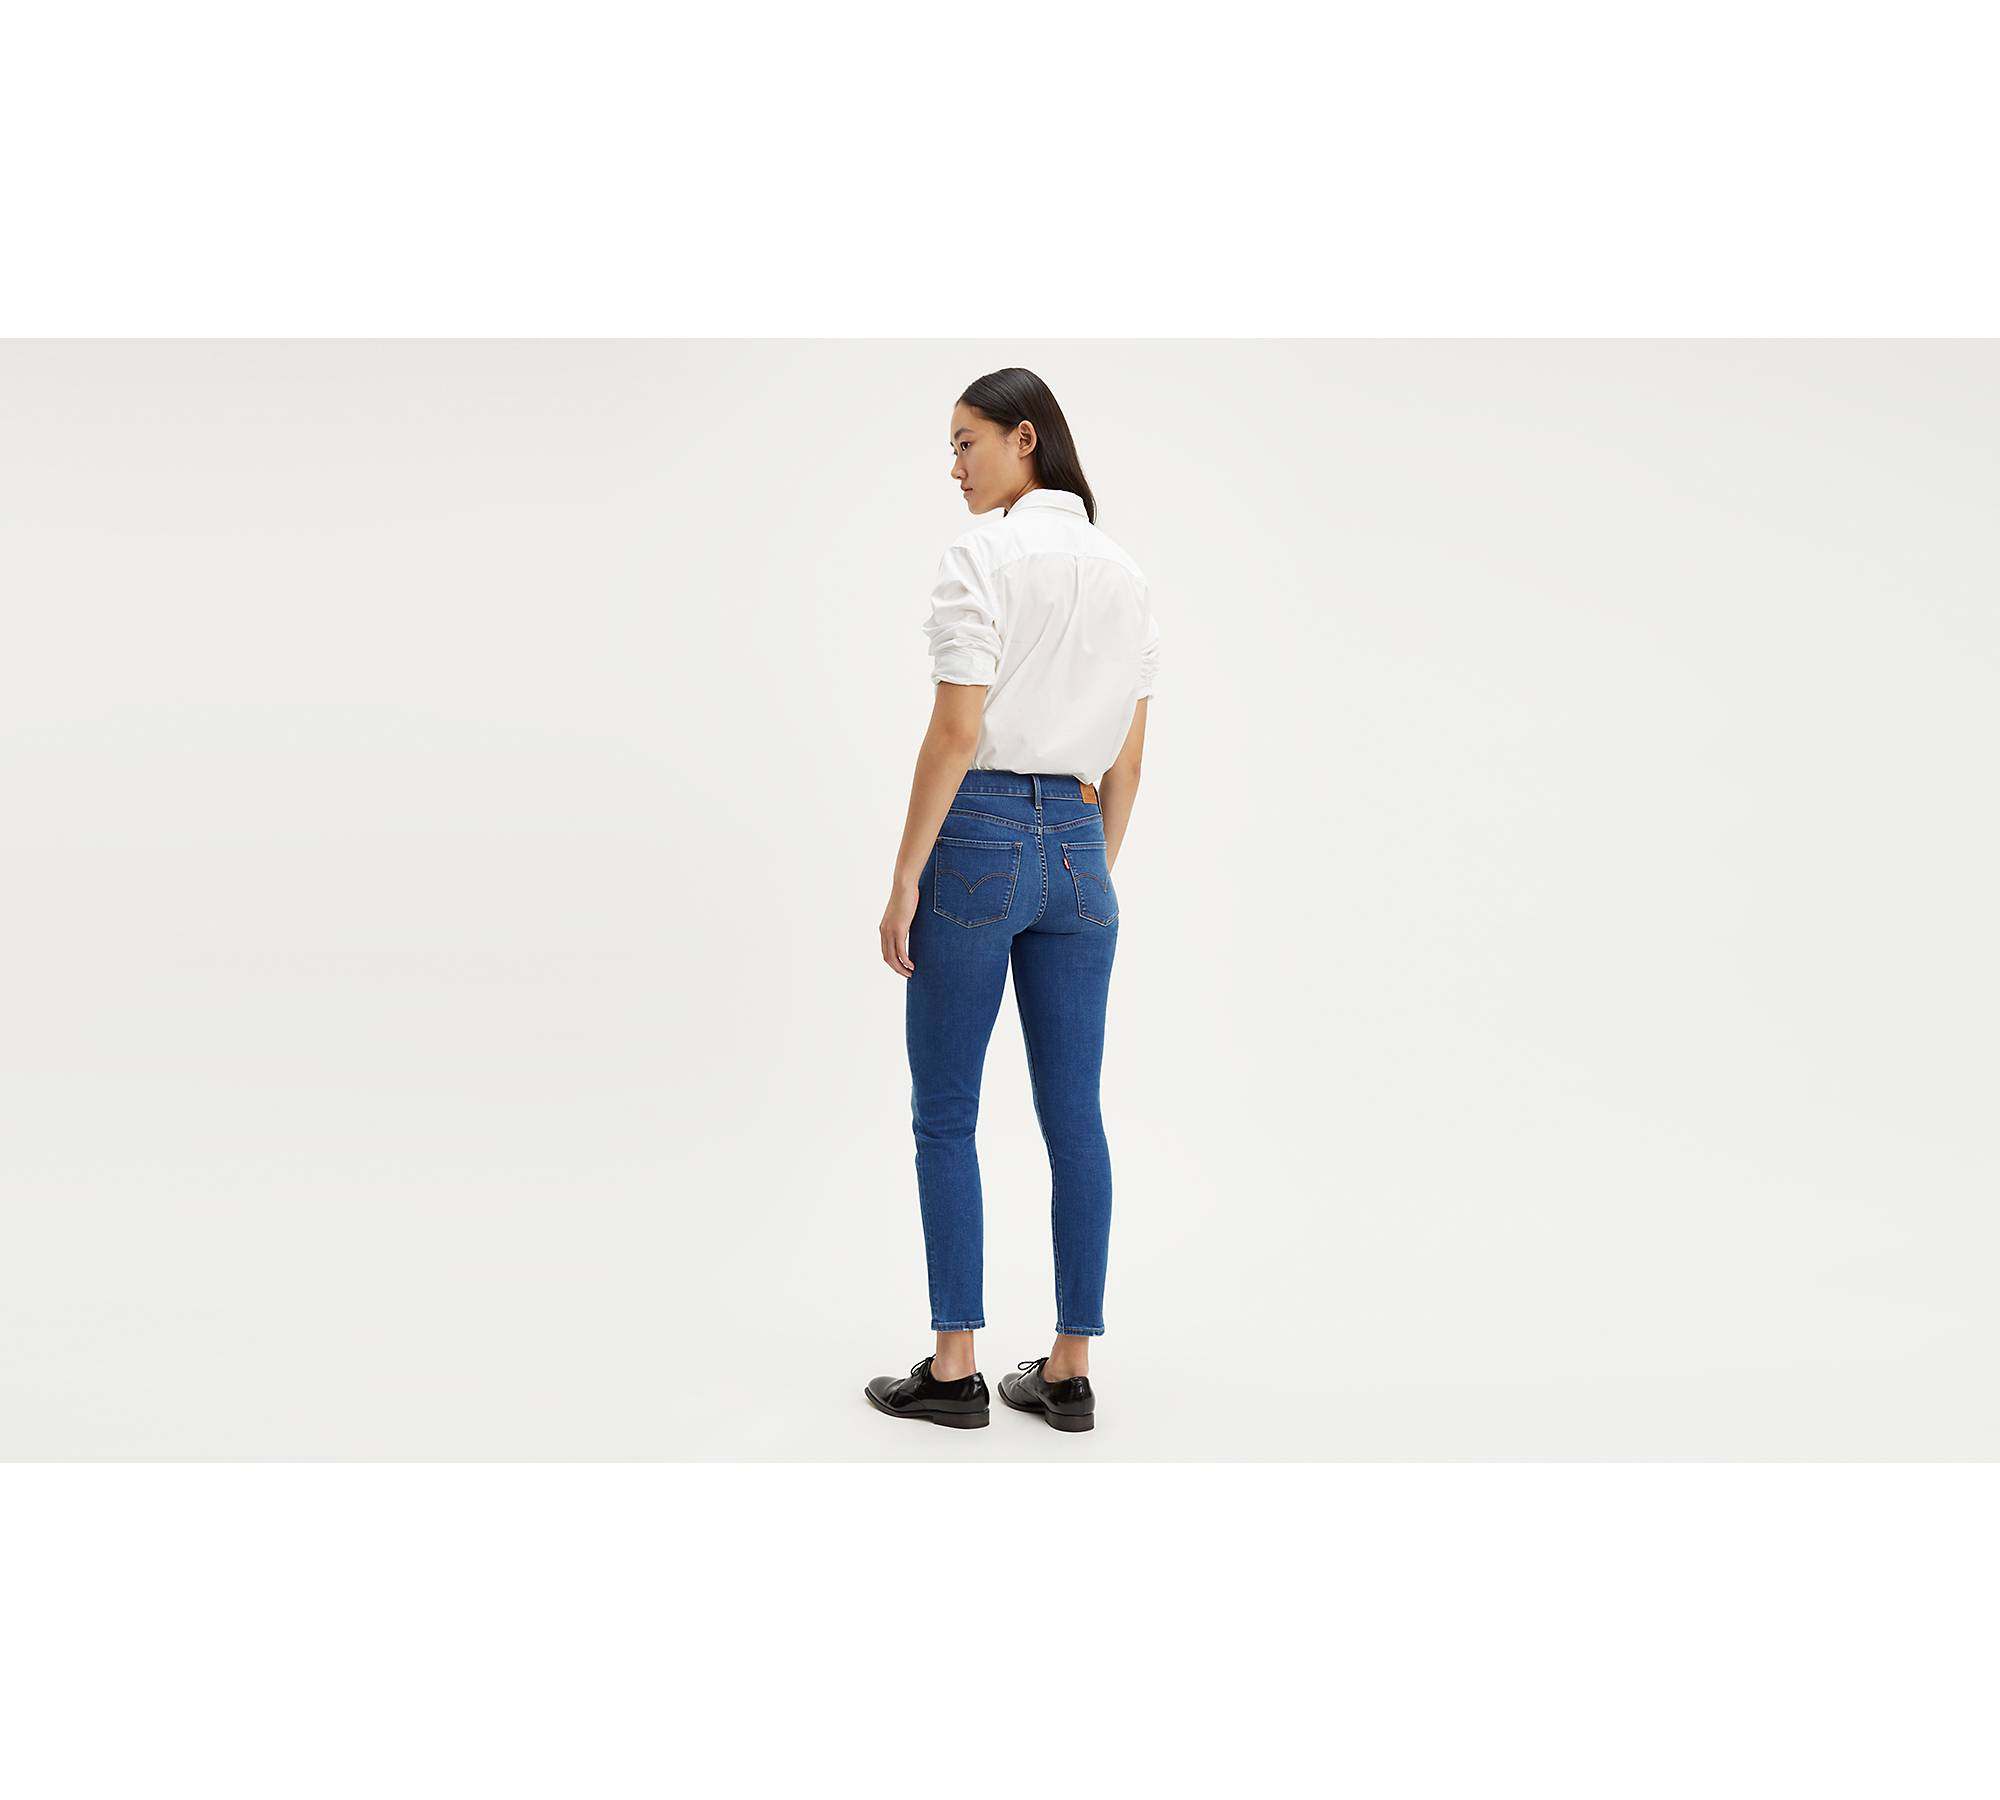 311 Shaping Skinny Ankle Women's Jeans - Medium Wash | Levi's® US